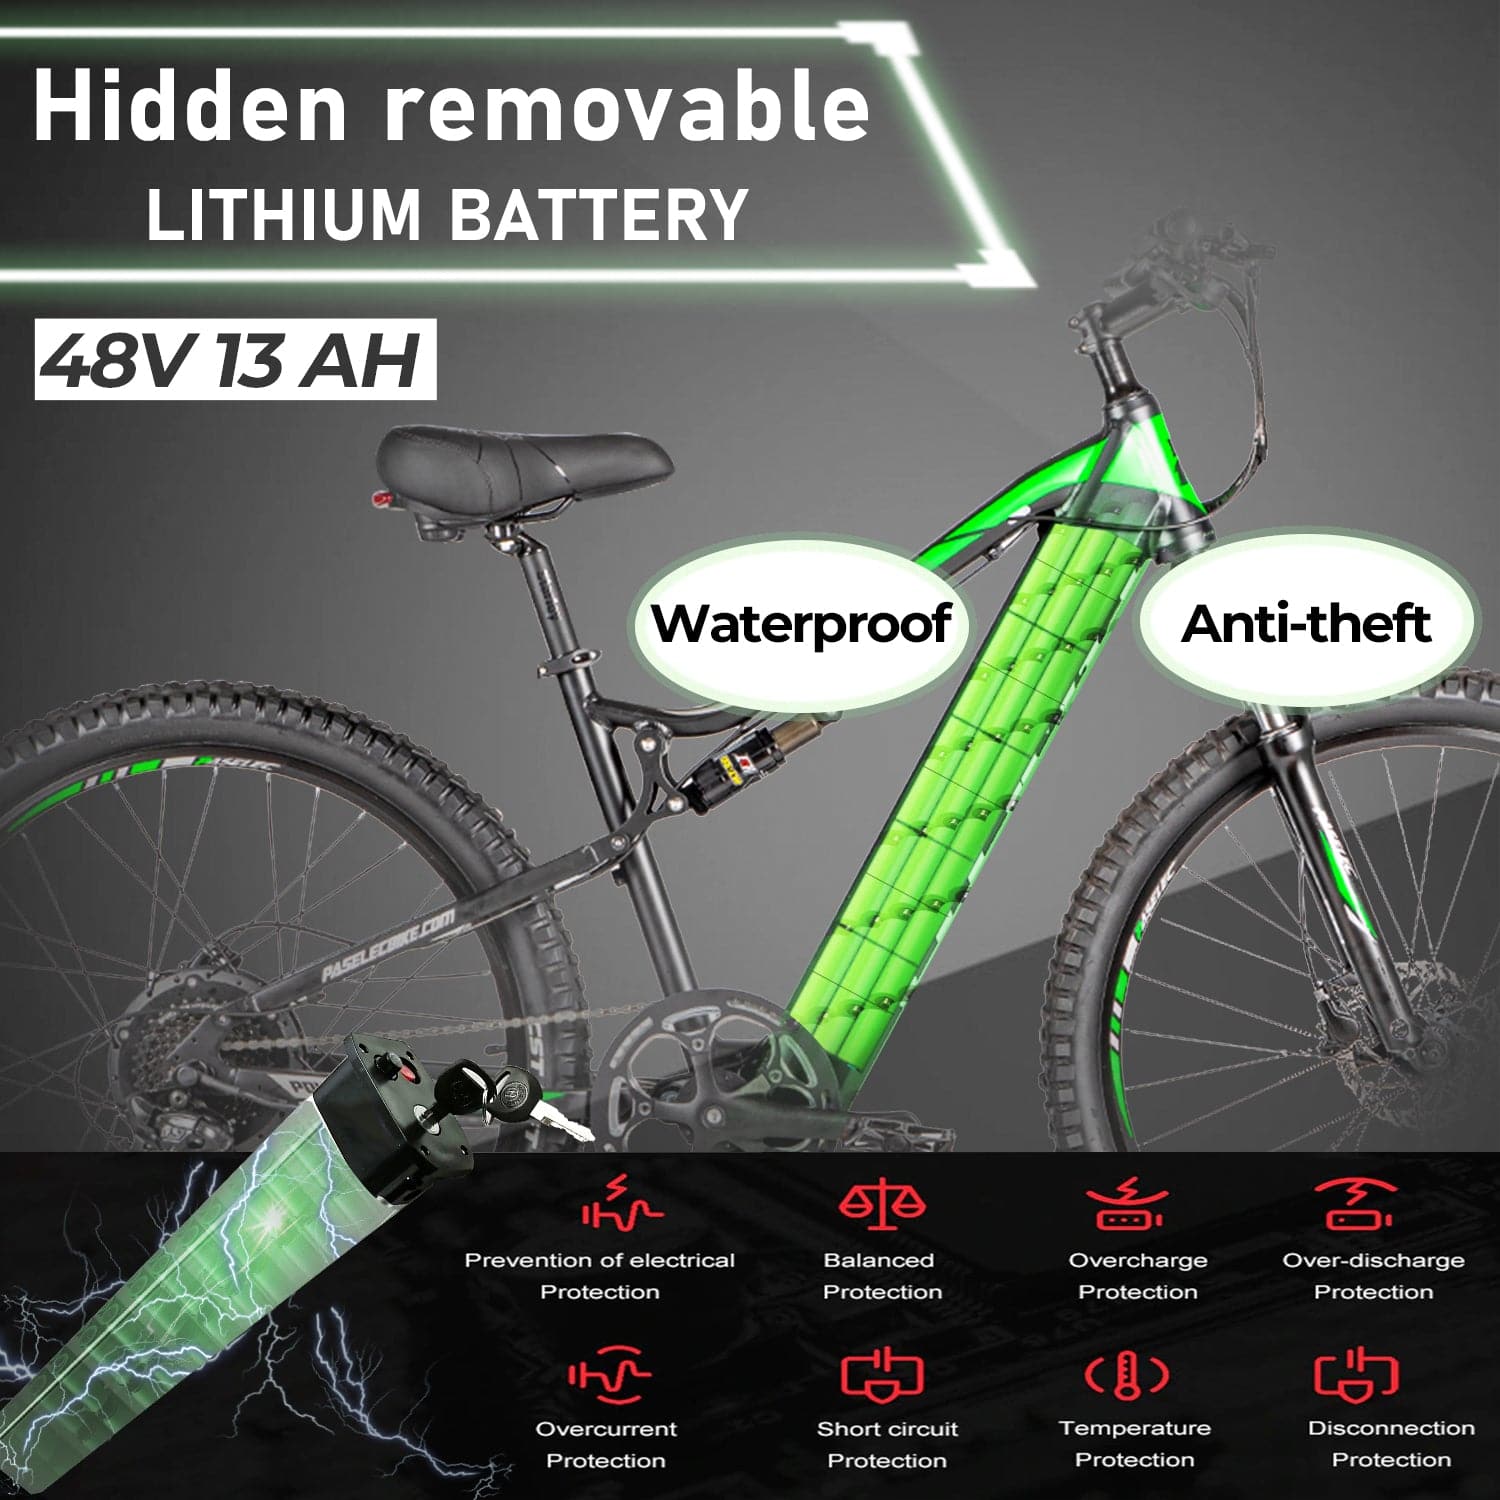 G9 GS9 GS9Plus Battery, 48V,13AH with 8 Protection,Lithium Batteries for Electric Bike